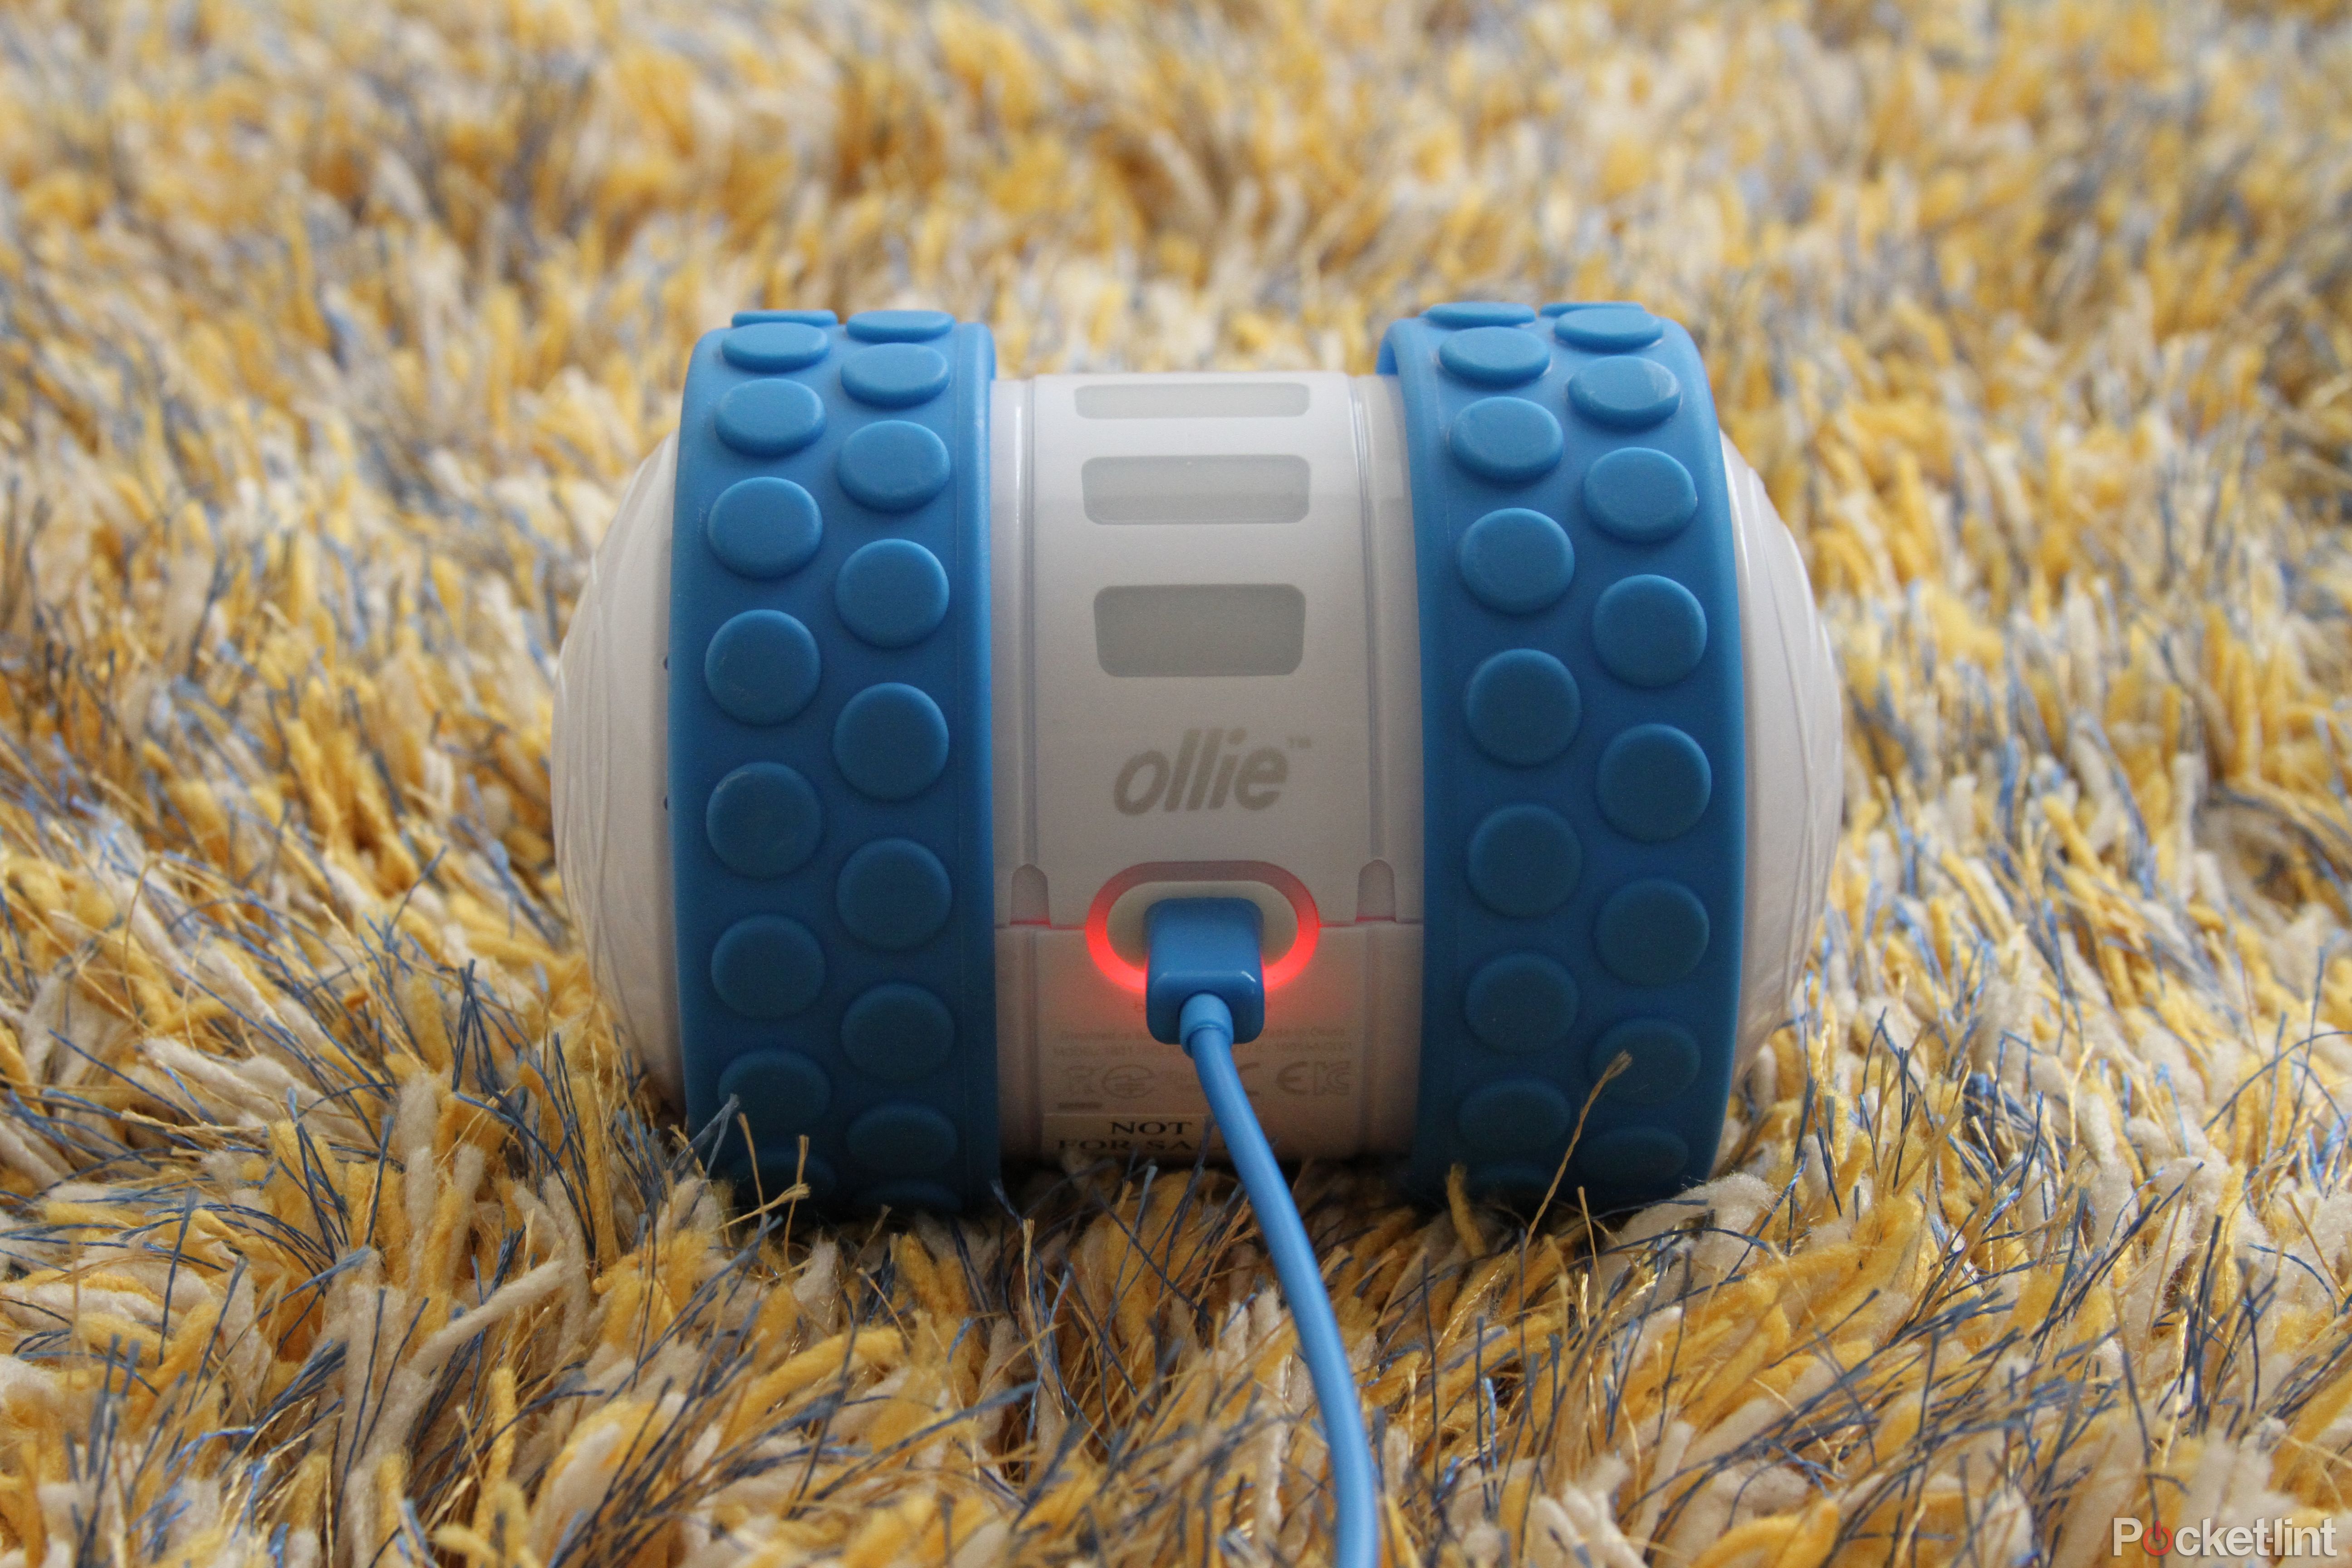 https://static0.pocketlintimages.com/wordpress/wp-content/uploads/wm/130719-parenting-news-hands-on-sphero-ollie-hands-on-review-cylindrical-fast-and-totally-cool-image13-mrGZ61cEVy.jpg